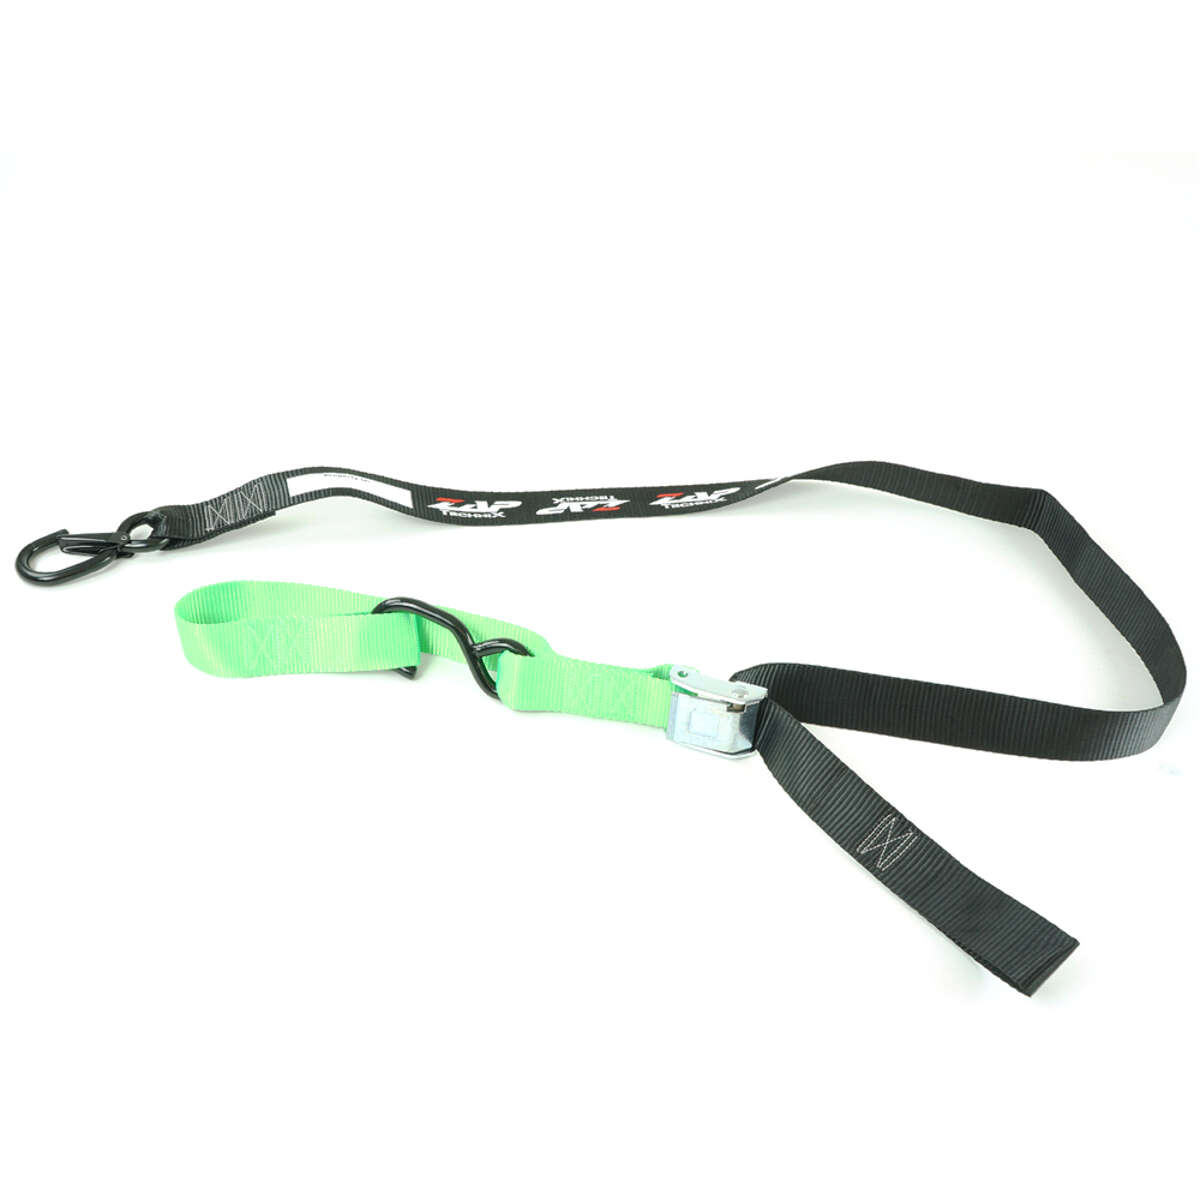 ZAP Securing Strap  2-pieces, 40 mm wide, Green/Black